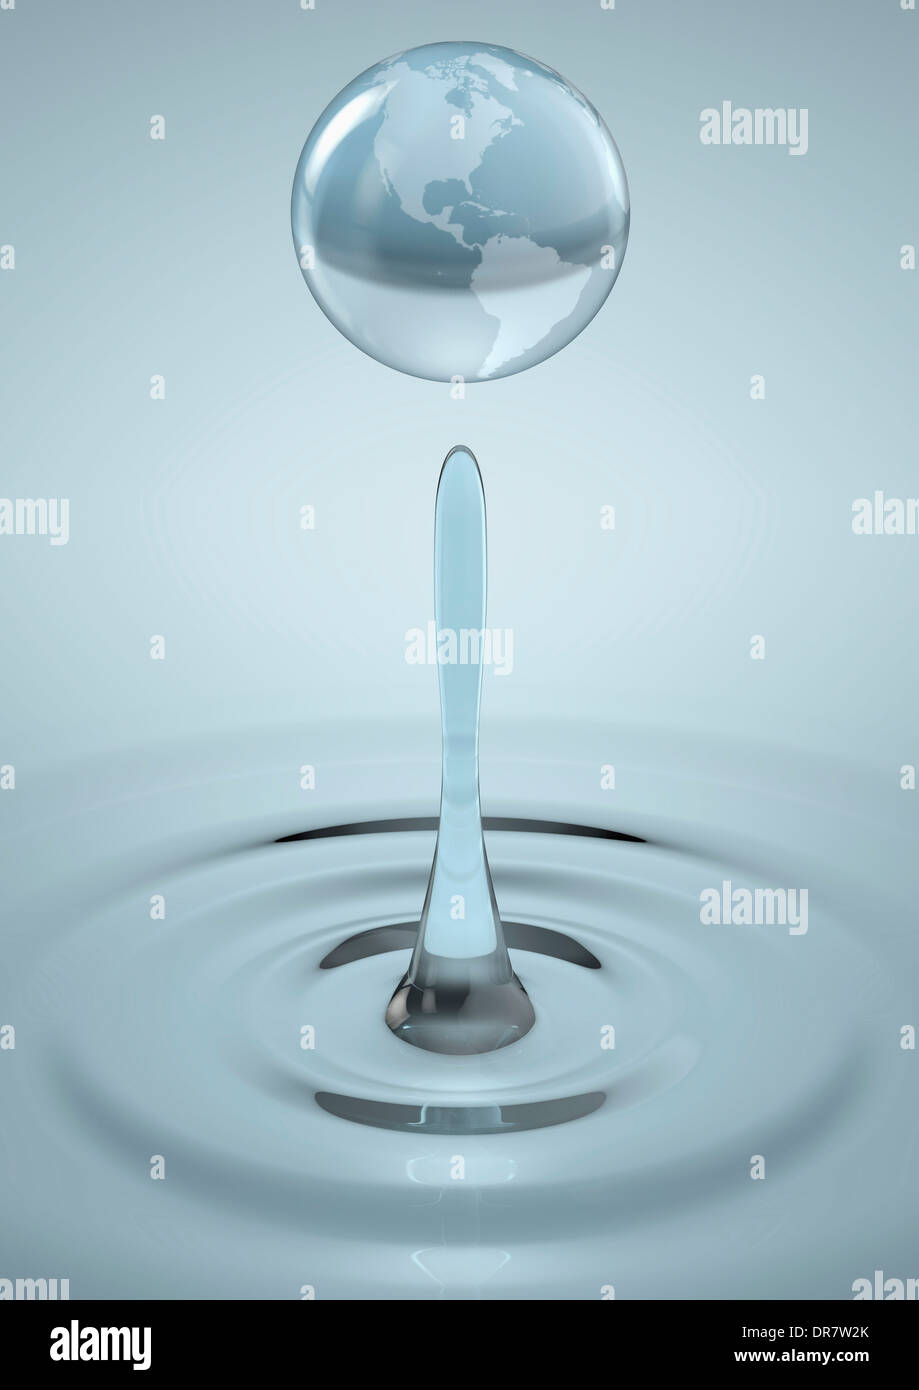 Earth formed from a water droplet focusing on North and South America - Environmental concept Stock Photo